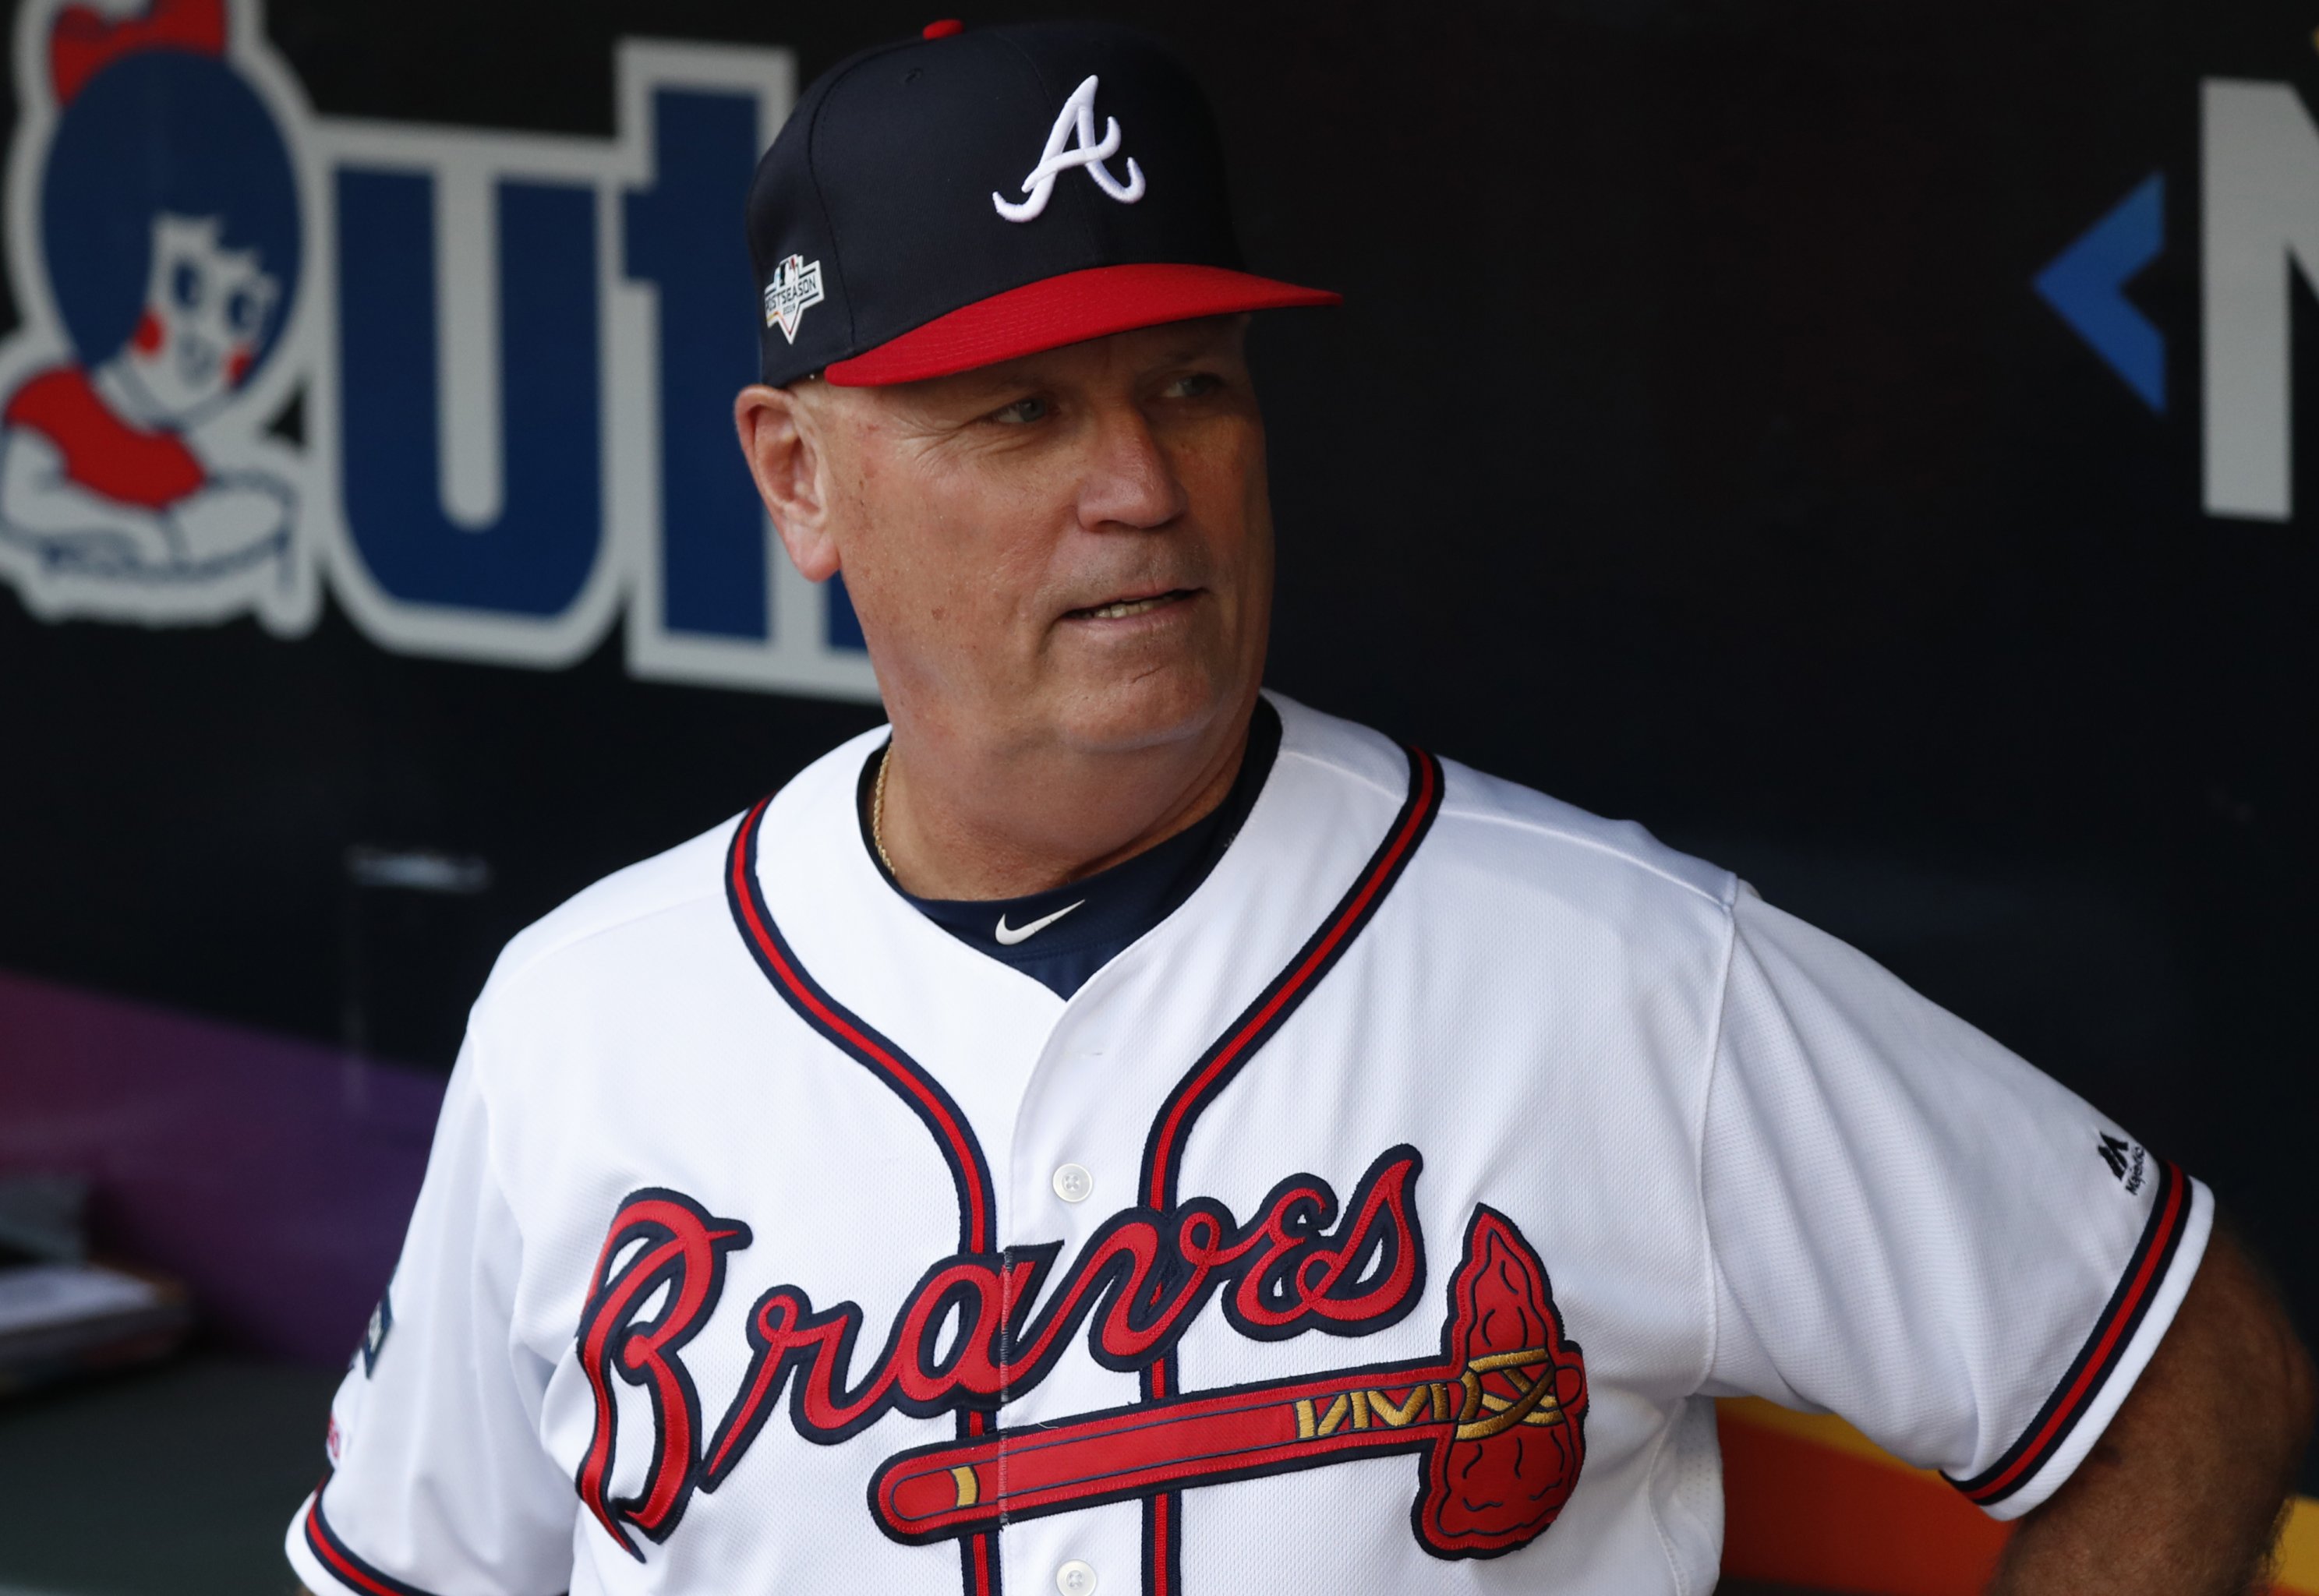 Ranking All 30 Managers in Major League Baseball 